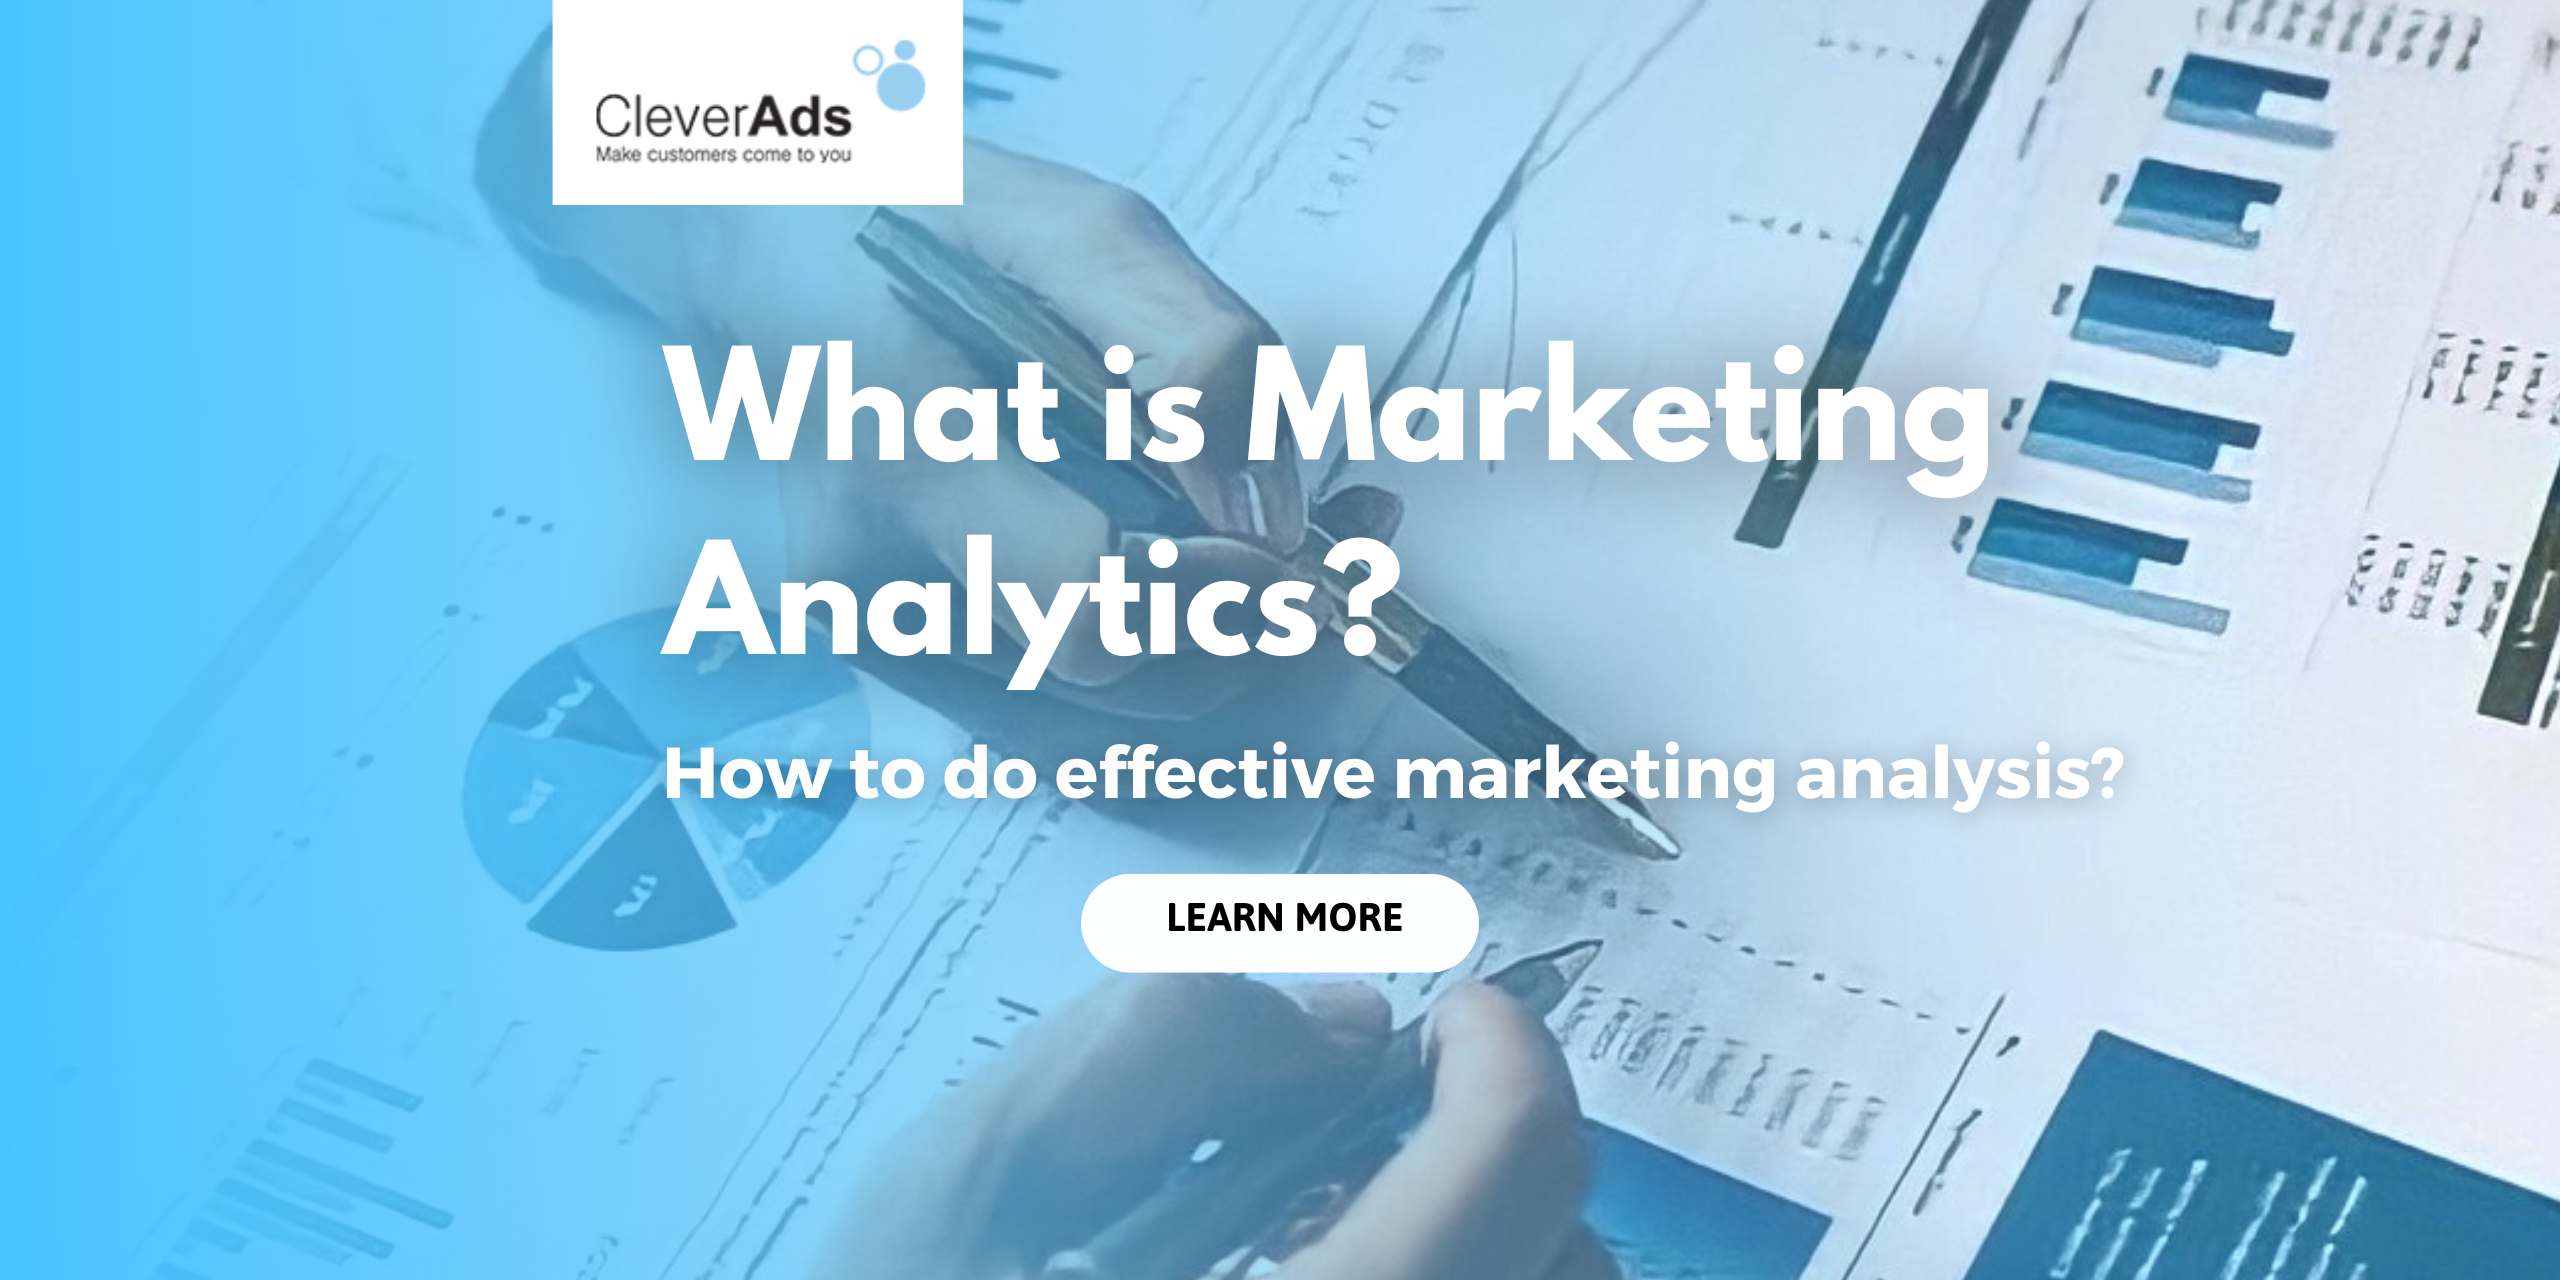 What is marketing analytics? How to effectively use it?